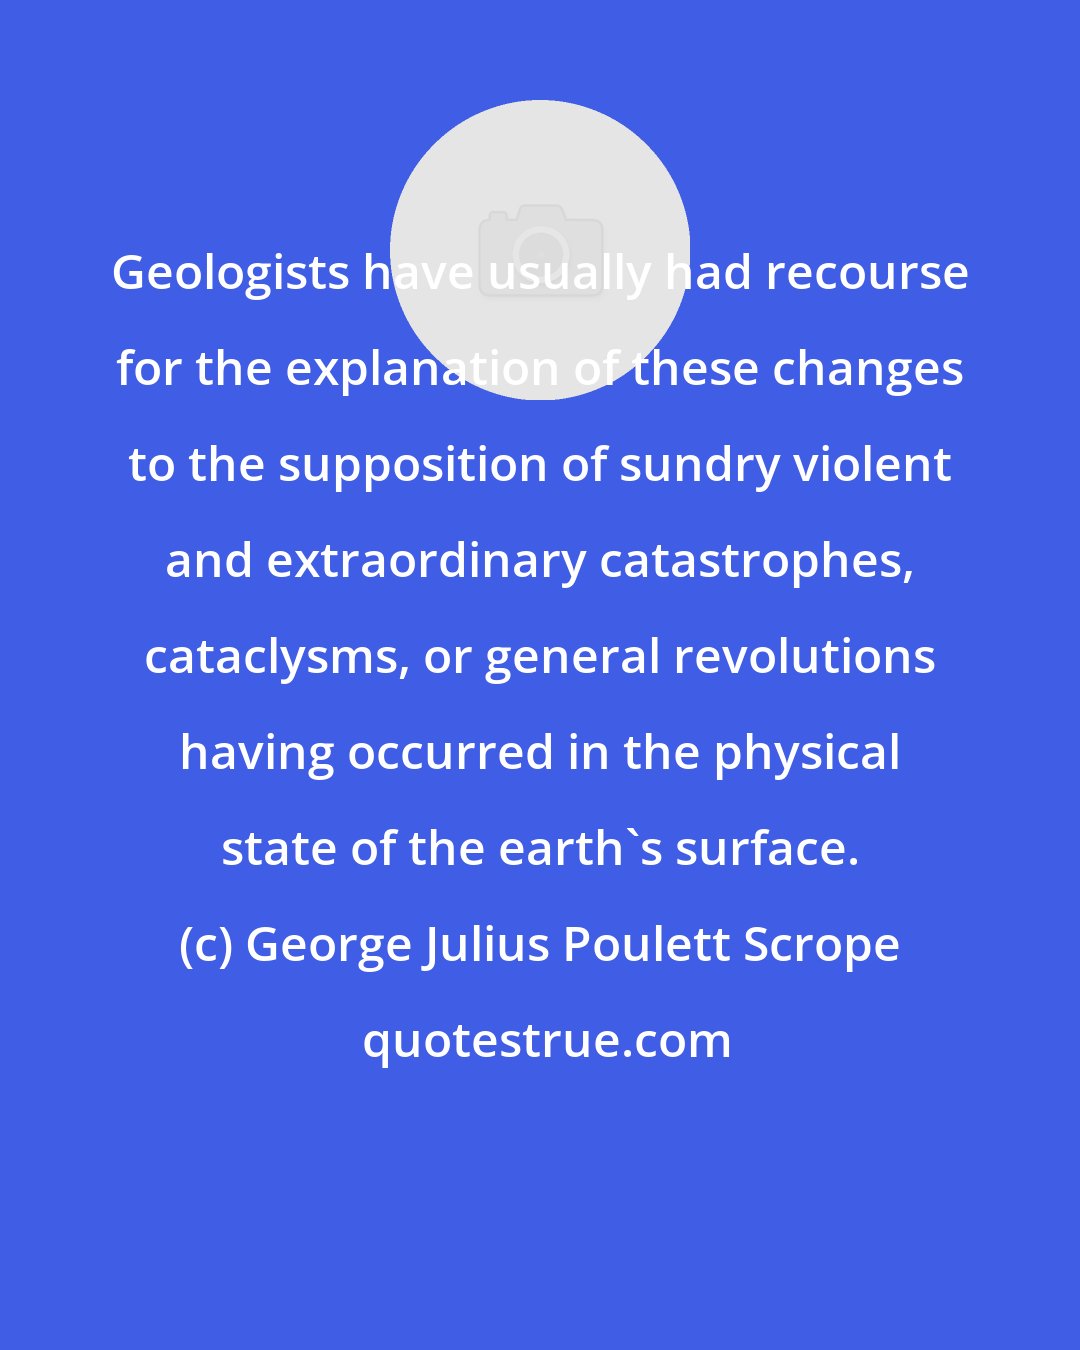 George Julius Poulett Scrope: Geologists have usually had recourse for the explanation of these changes to the supposition of sundry violent and extraordinary catastrophes, cataclysms, or general revolutions having occurred in the physical state of the earth's surface.